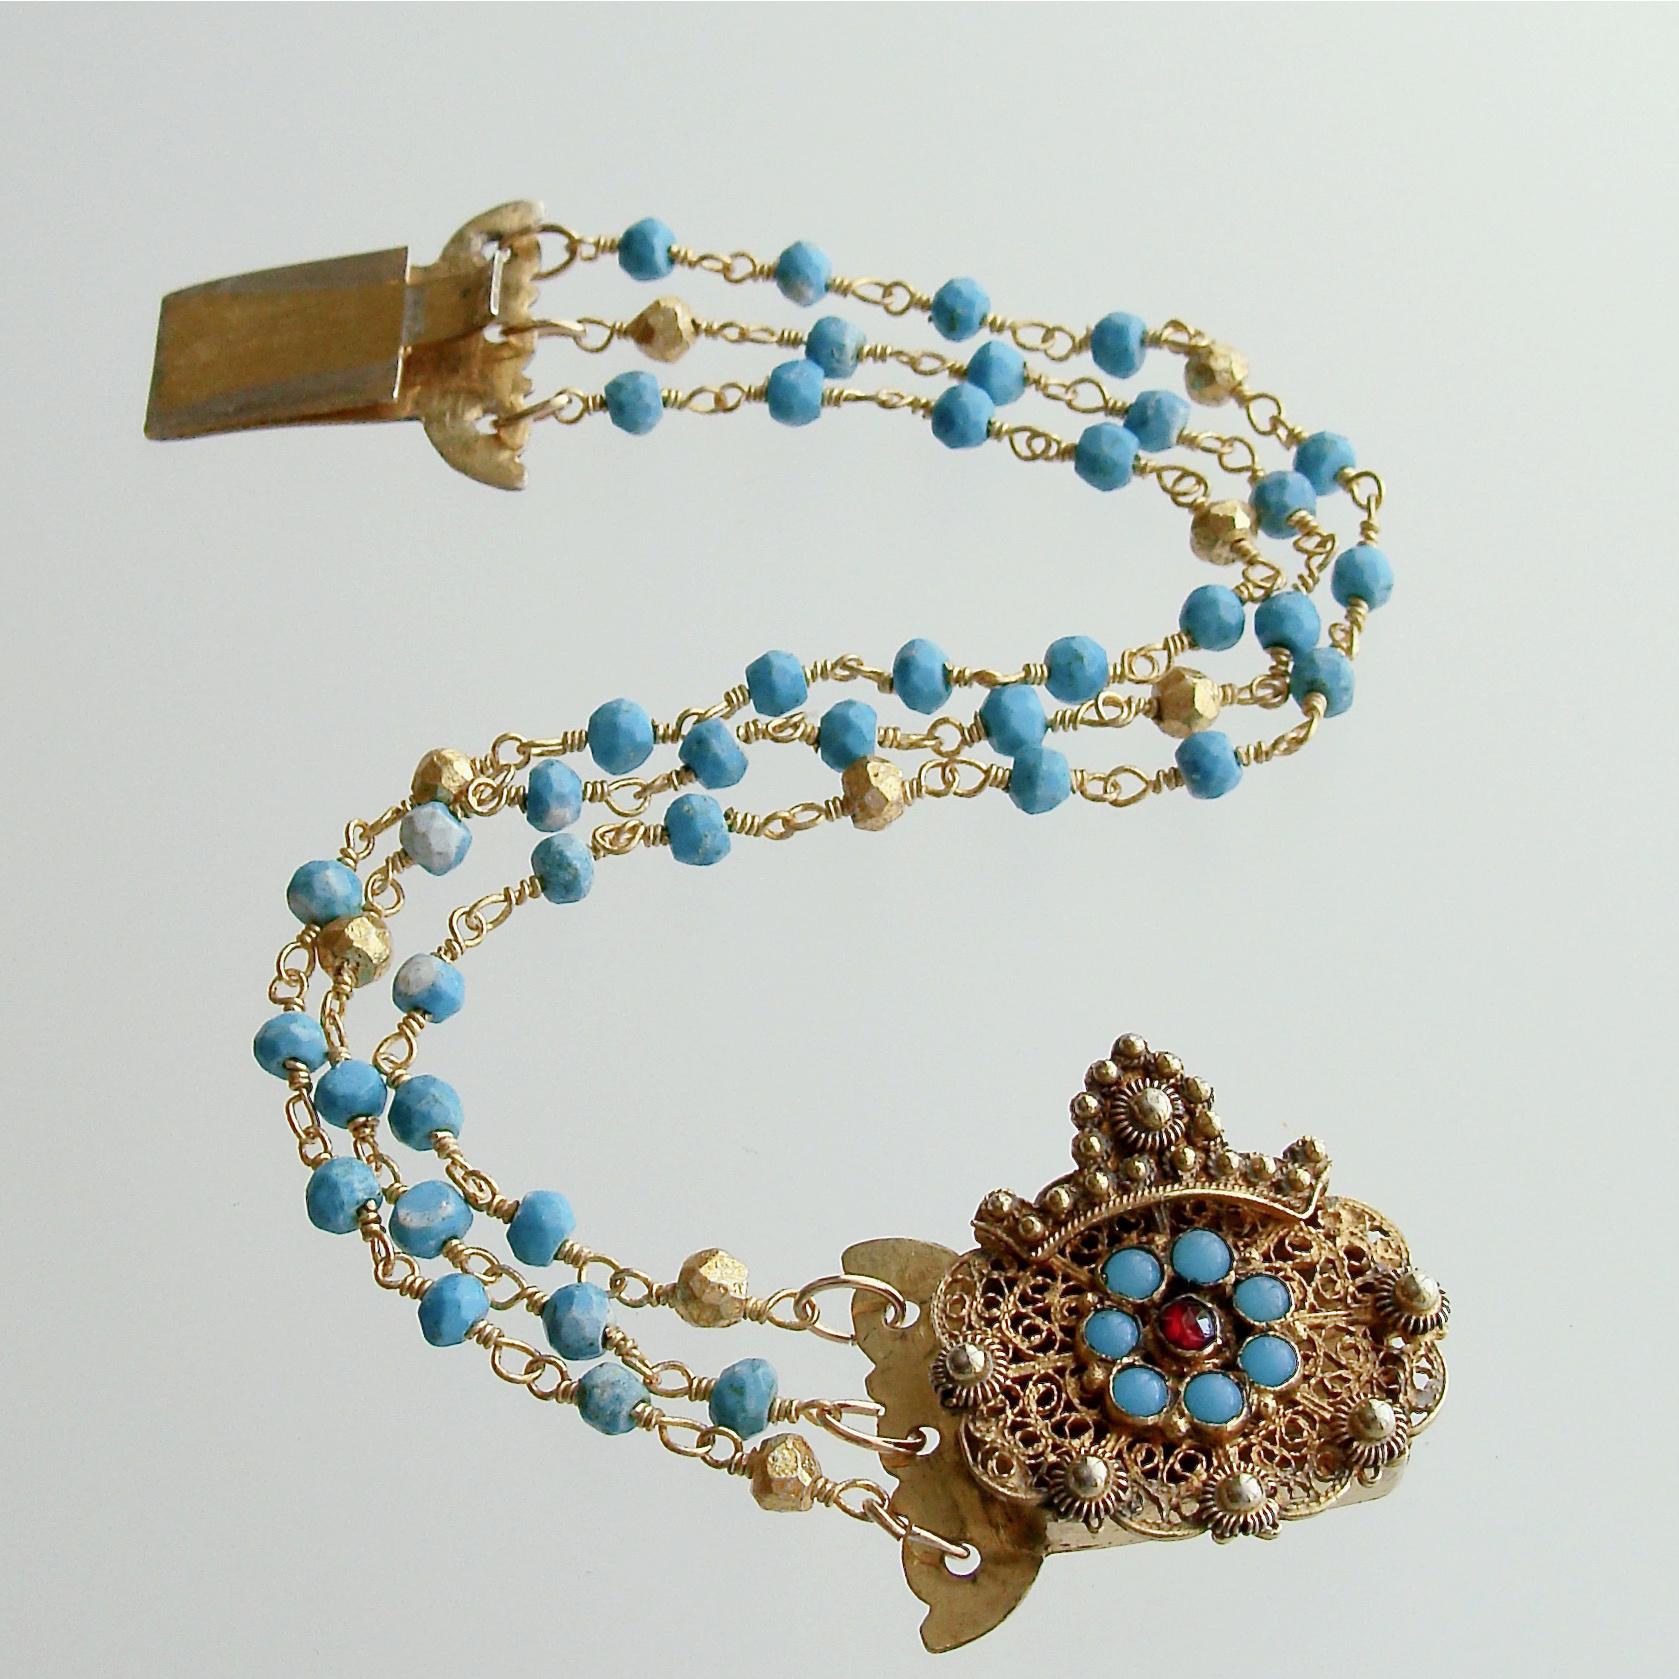 Seona Bracelet.
Triple strands of turquoise have been intercepted with gilded pyrite to create this charming and delicate bracelet.  The antique Georgian clasp had been adorned with a flower of turquoise and garnets while addressing the lovely